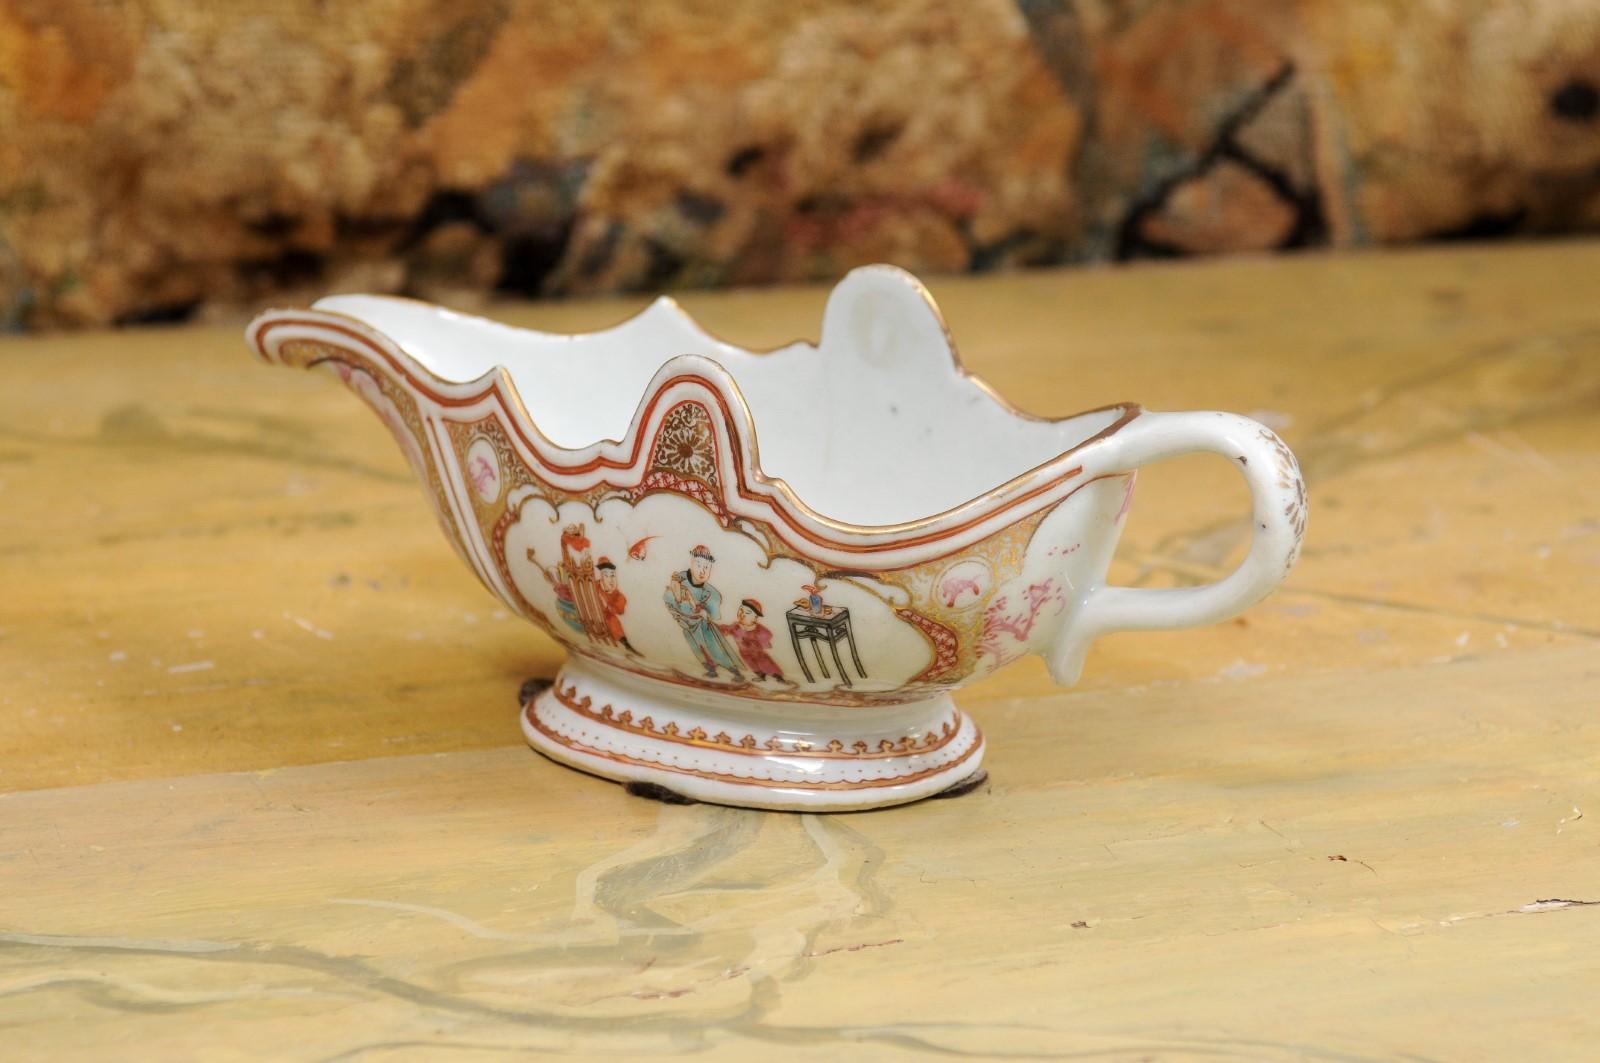  Late 18th Century Chinese Export Porcelain Sauce Boat For Sale 2